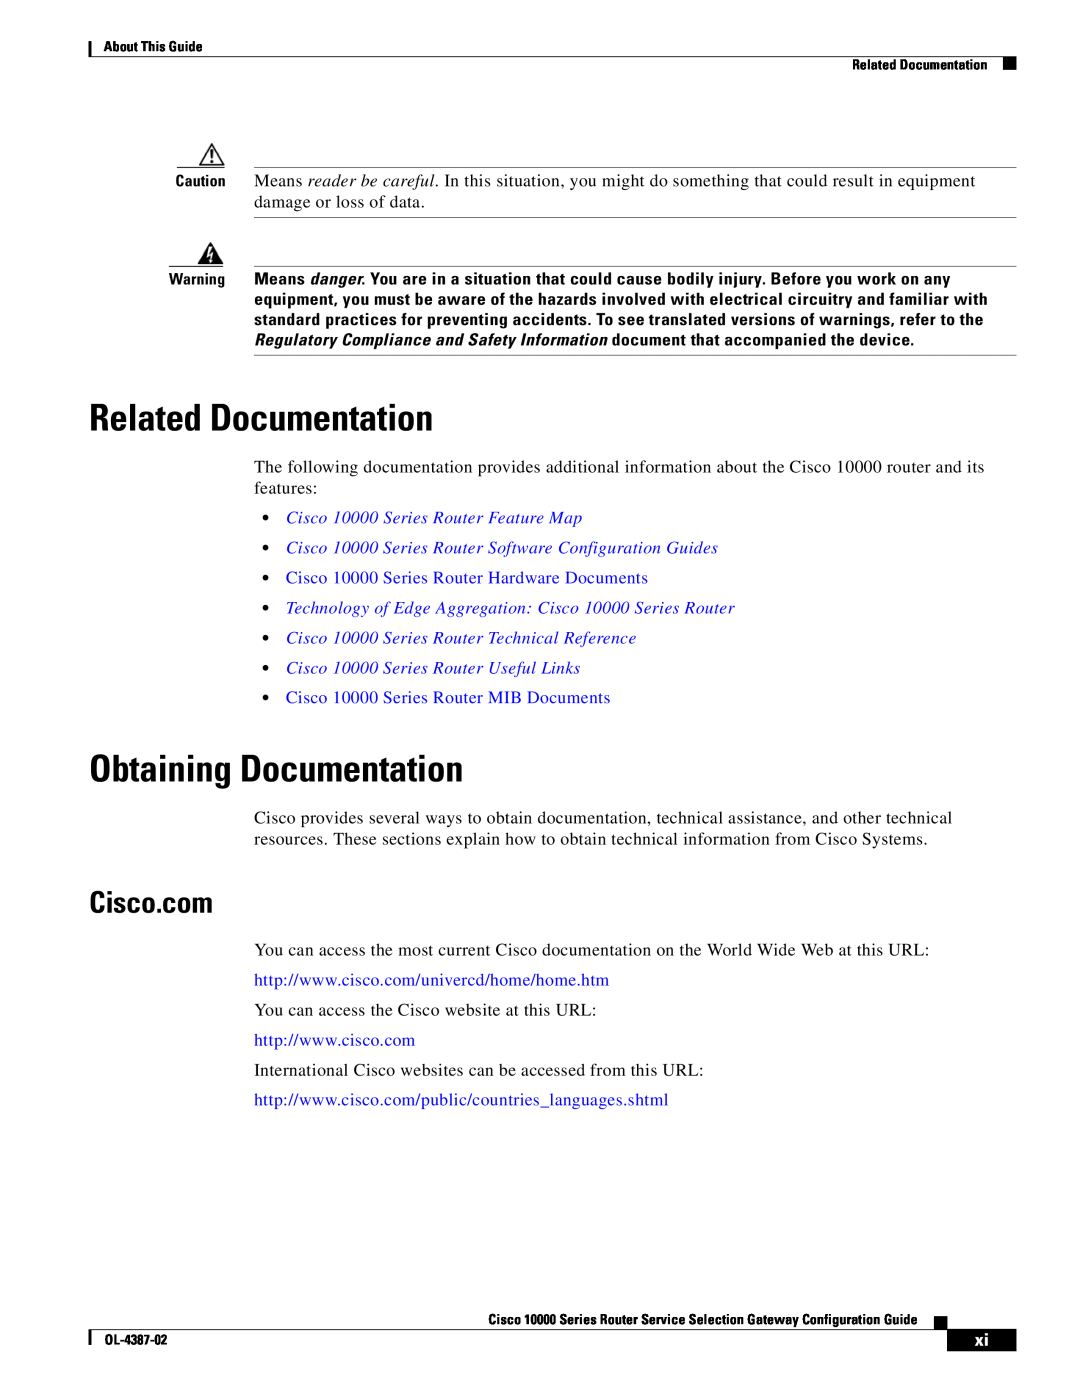 Cisco Systems OL-4387-02 Related Documentation, Obtaining Documentation, Cisco.com, Cisco 10000 Series Router Feature Map 